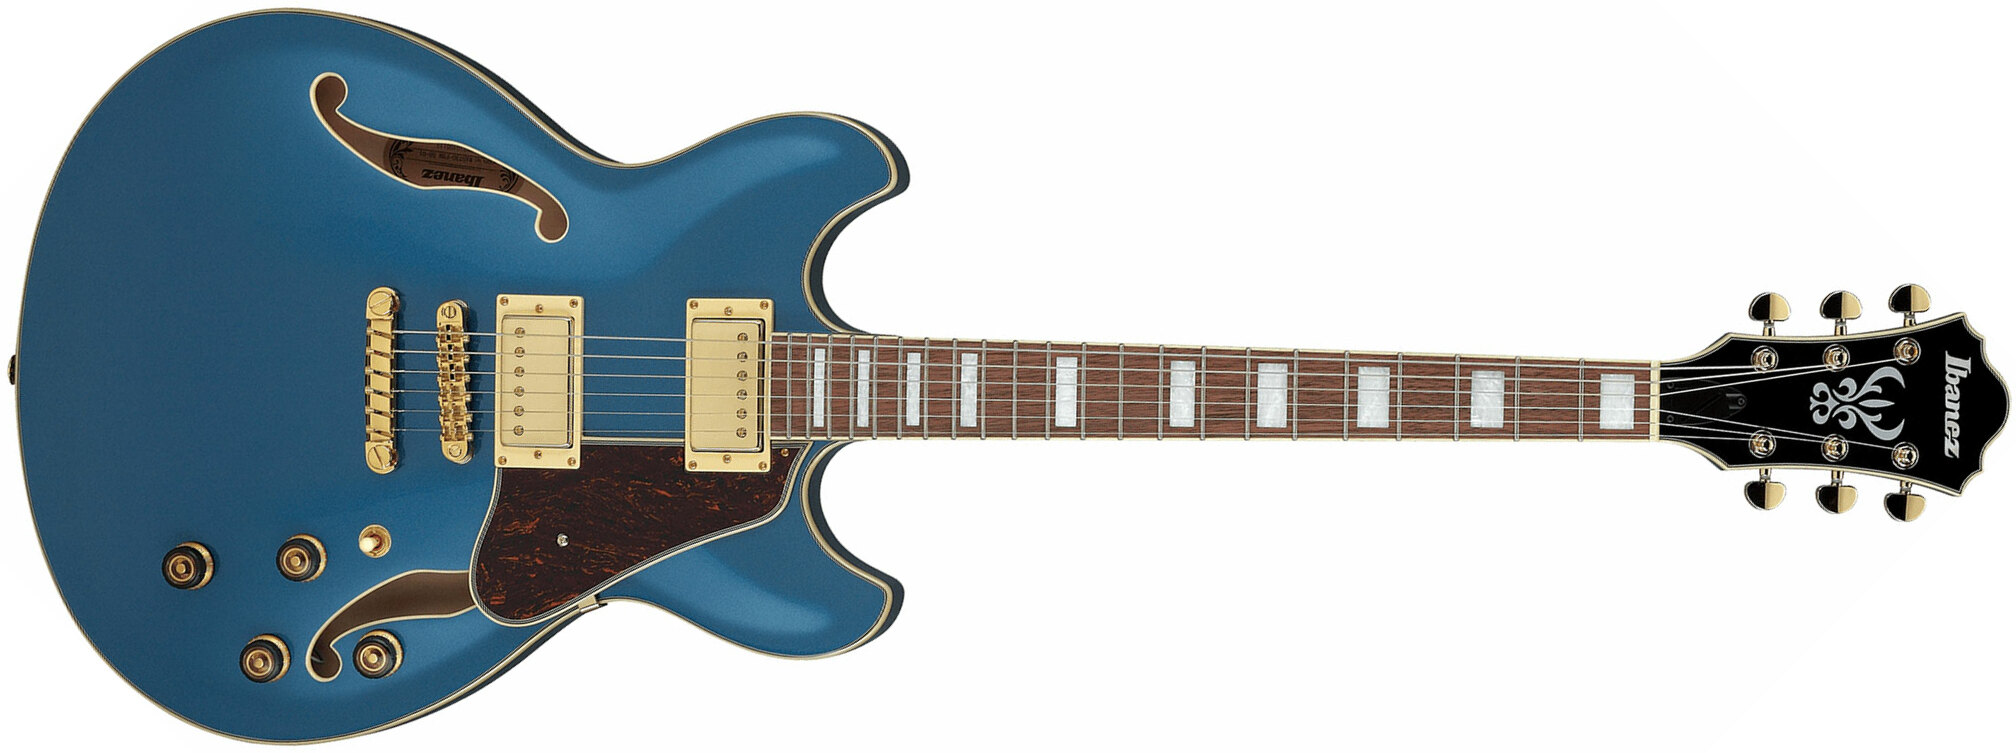 Ibanez As73g Pbm Artcore Hh Ht Noy - Prussian Blue Metallic - Semi-hollow electric guitar - Main picture